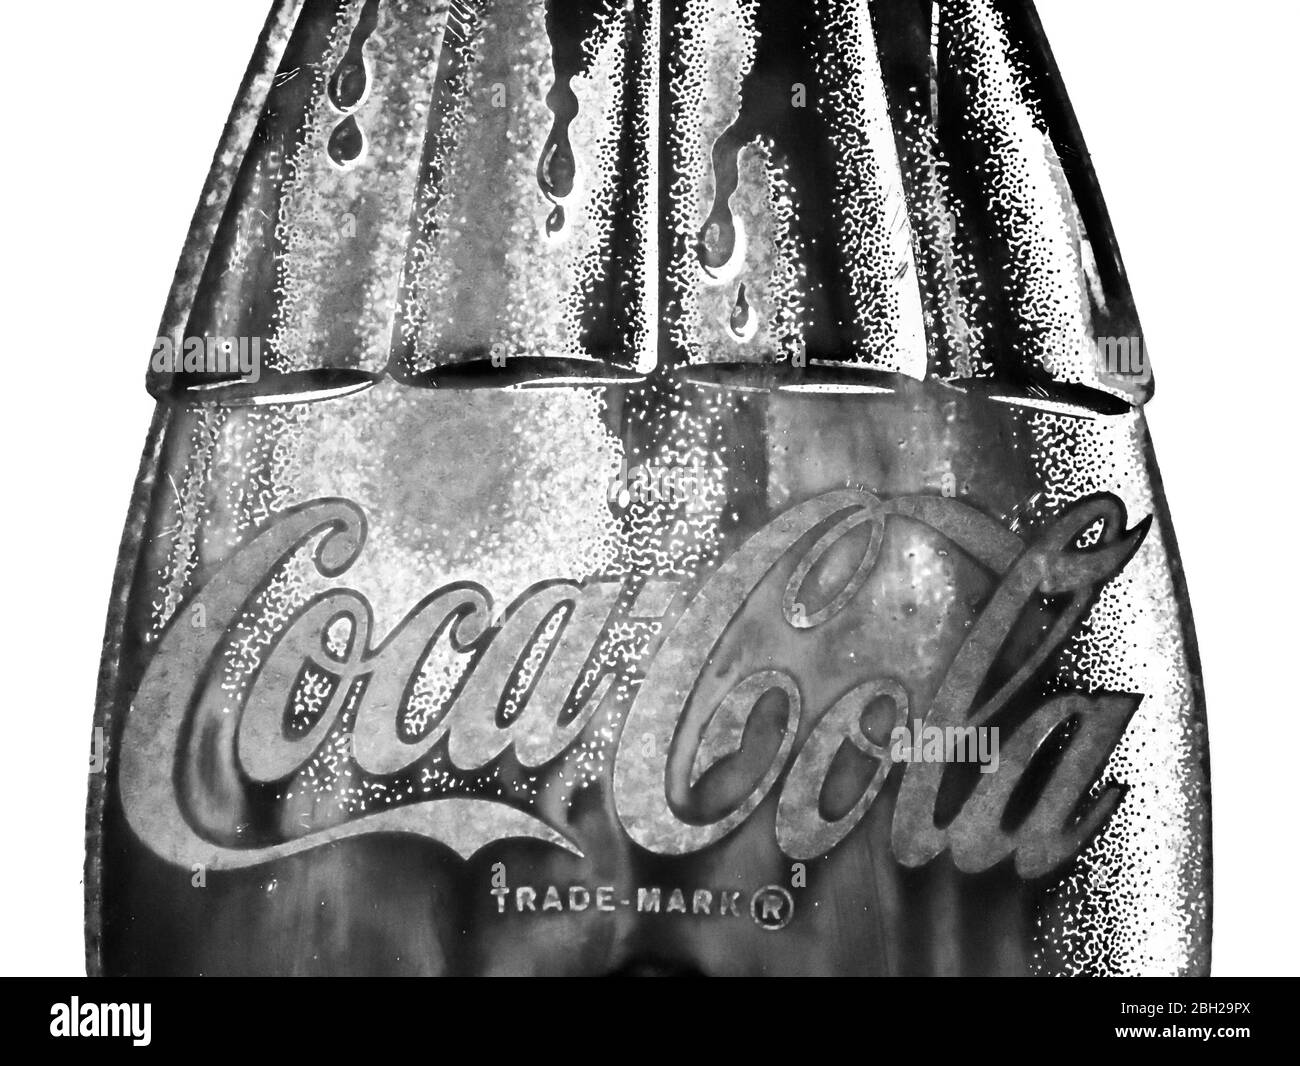 Coca cola bottle Black and White Stock Photos & Images - Alamy